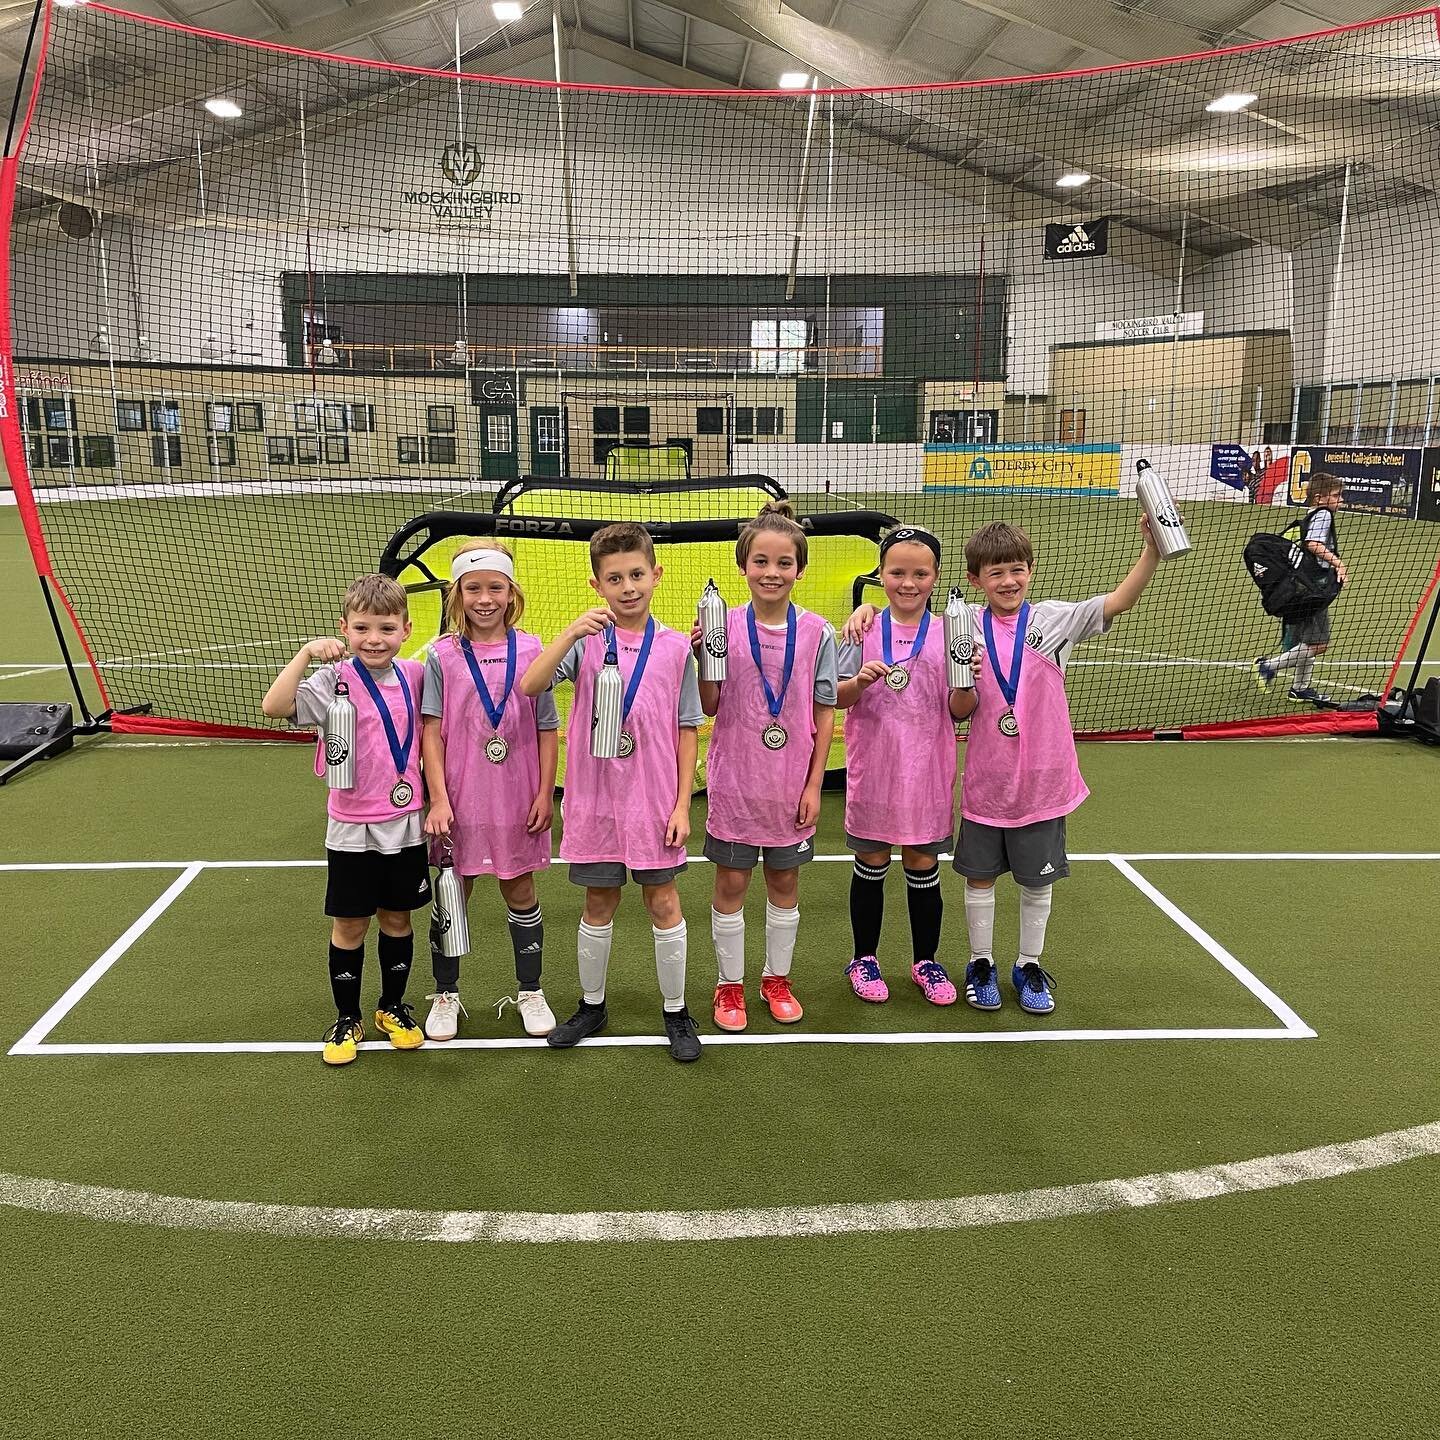 Congratulations to France who were crowned Champions of of annual Black Friday 4v4 Inner Club Tournament in our 2013-2015 age division! #mvpremier #thegoldstandard